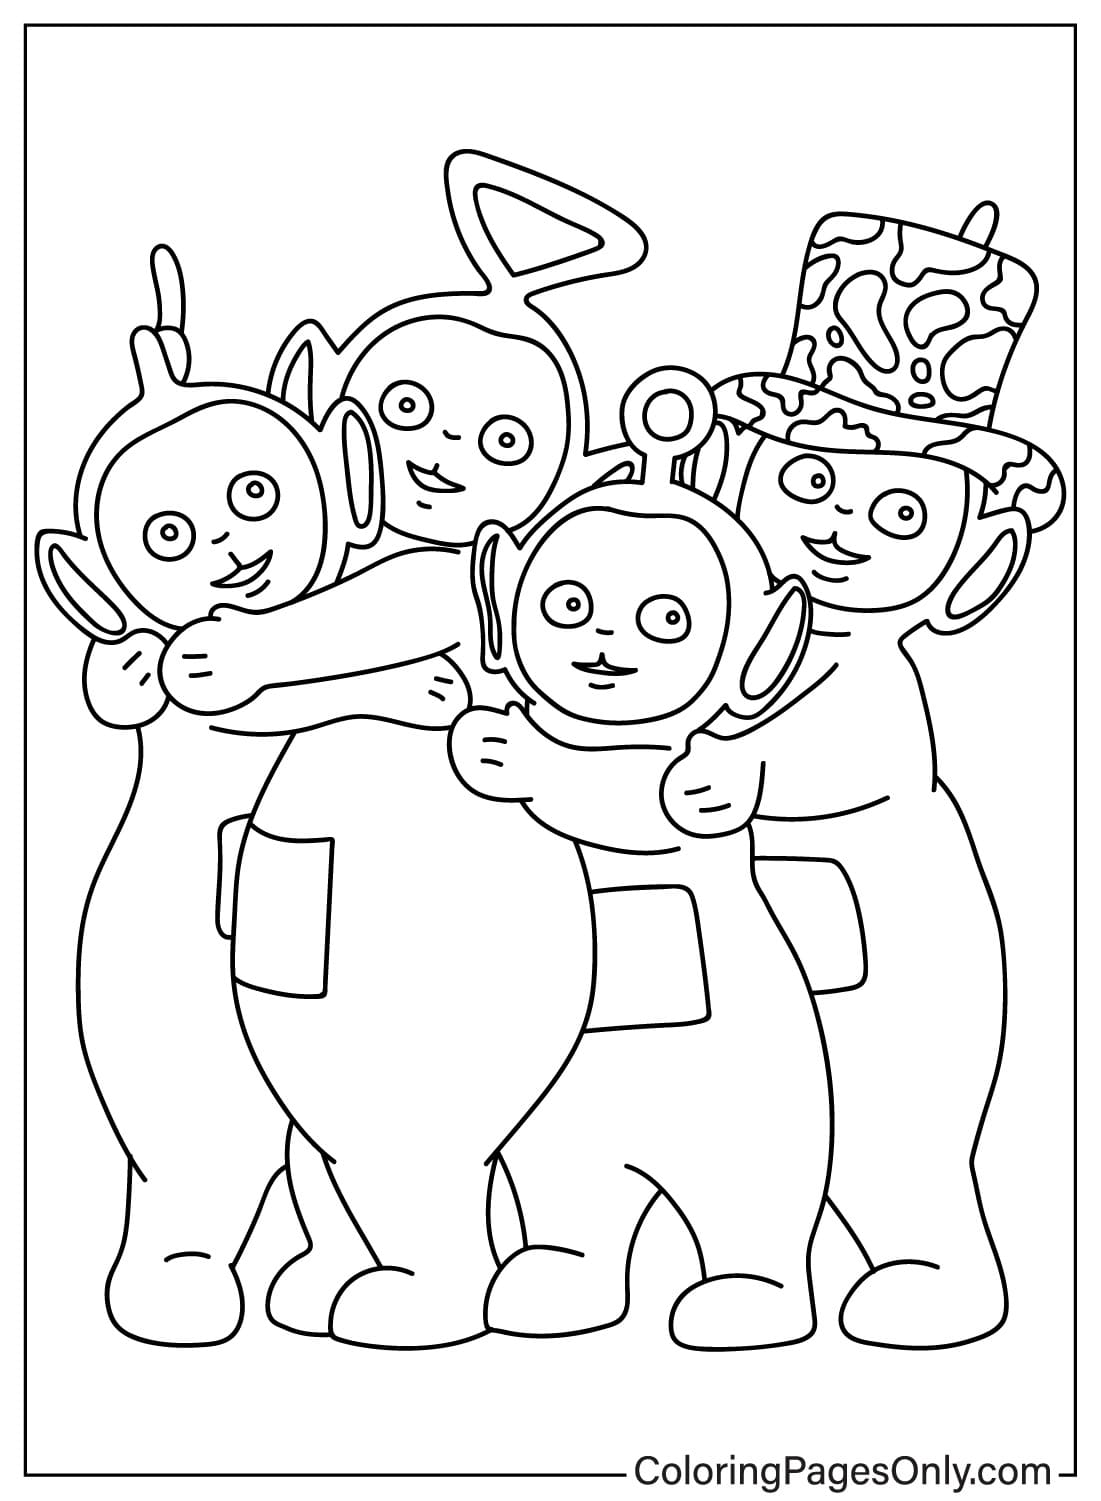 Free Teletubbies – WildBrain Coloring Page from Teletubbies - WildBrain